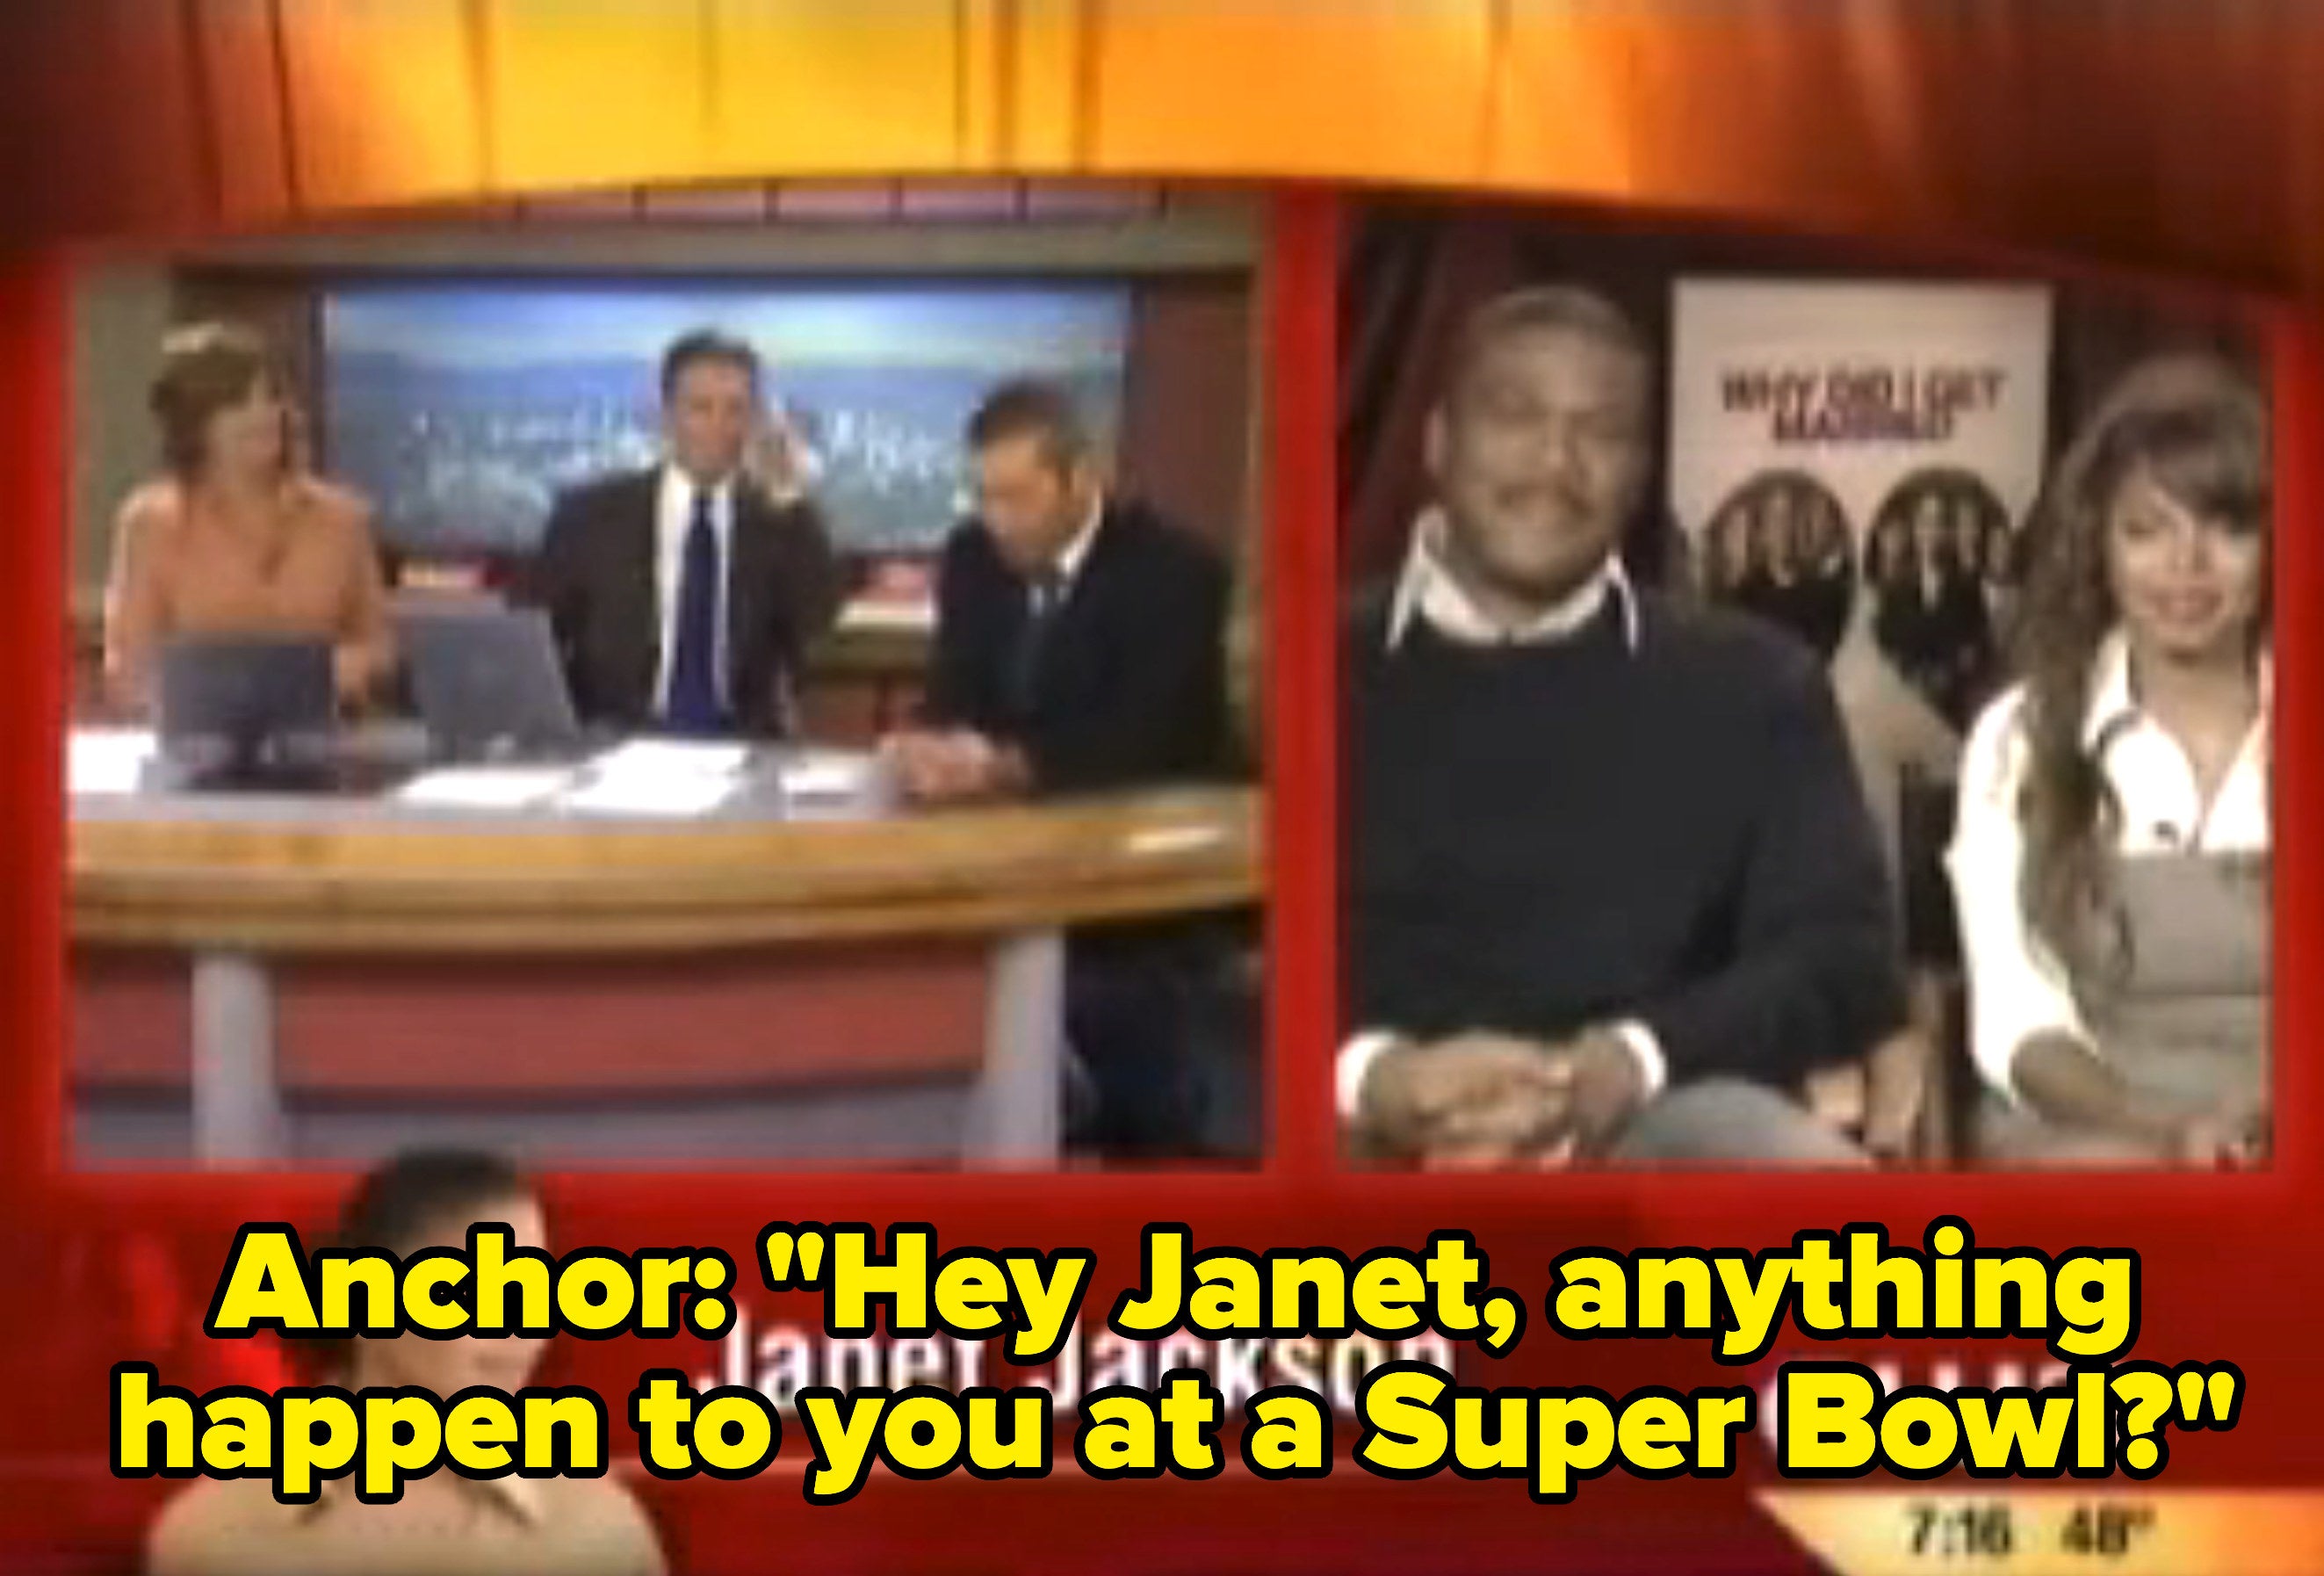 anchor asks, hey janet, anything happen to you at a super bowl